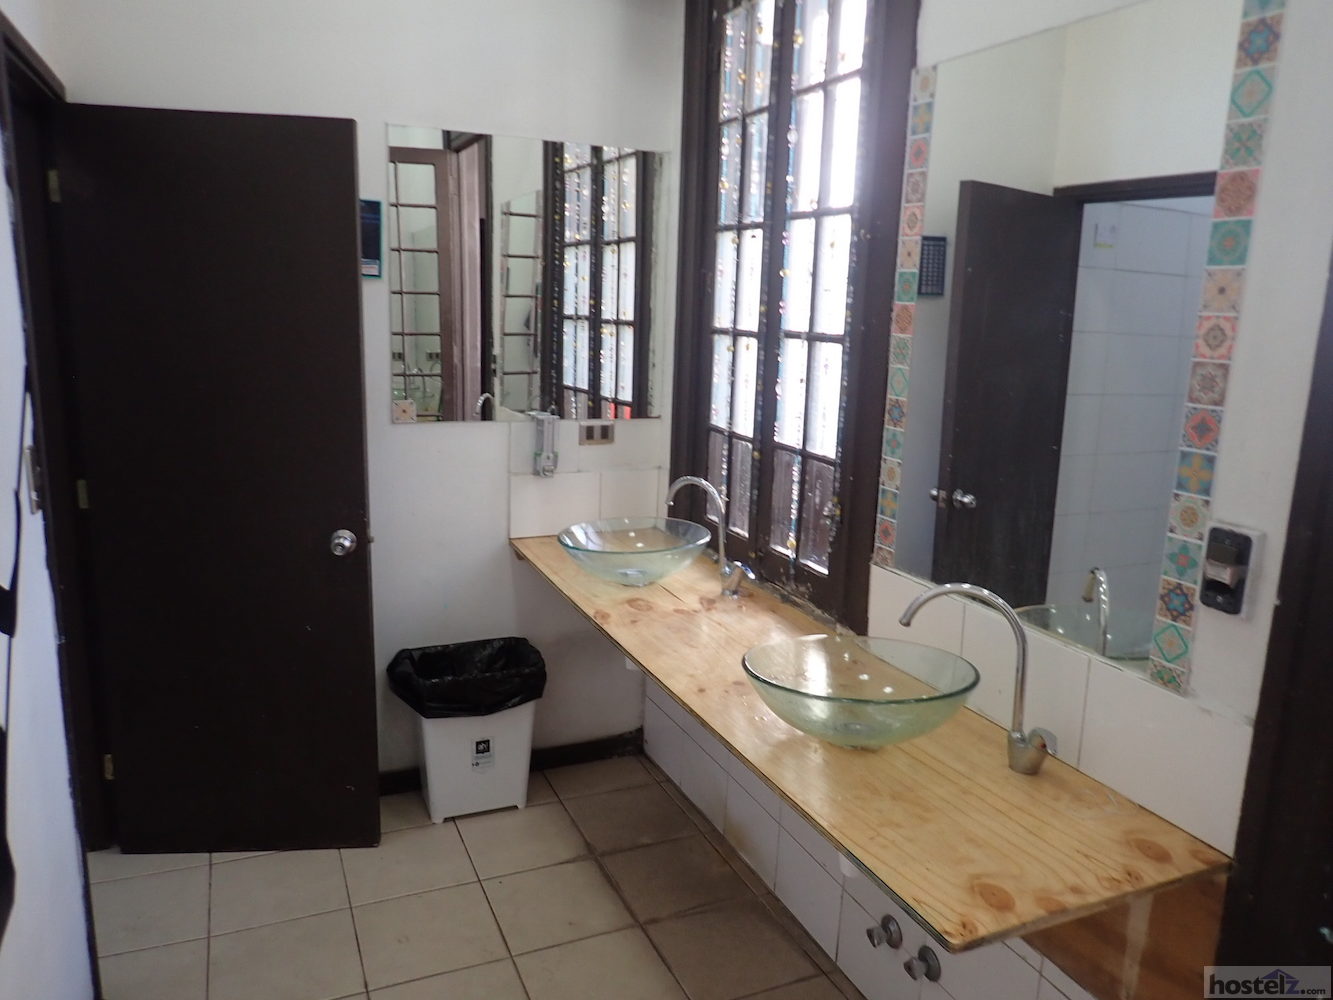 One of the communal bathrooms